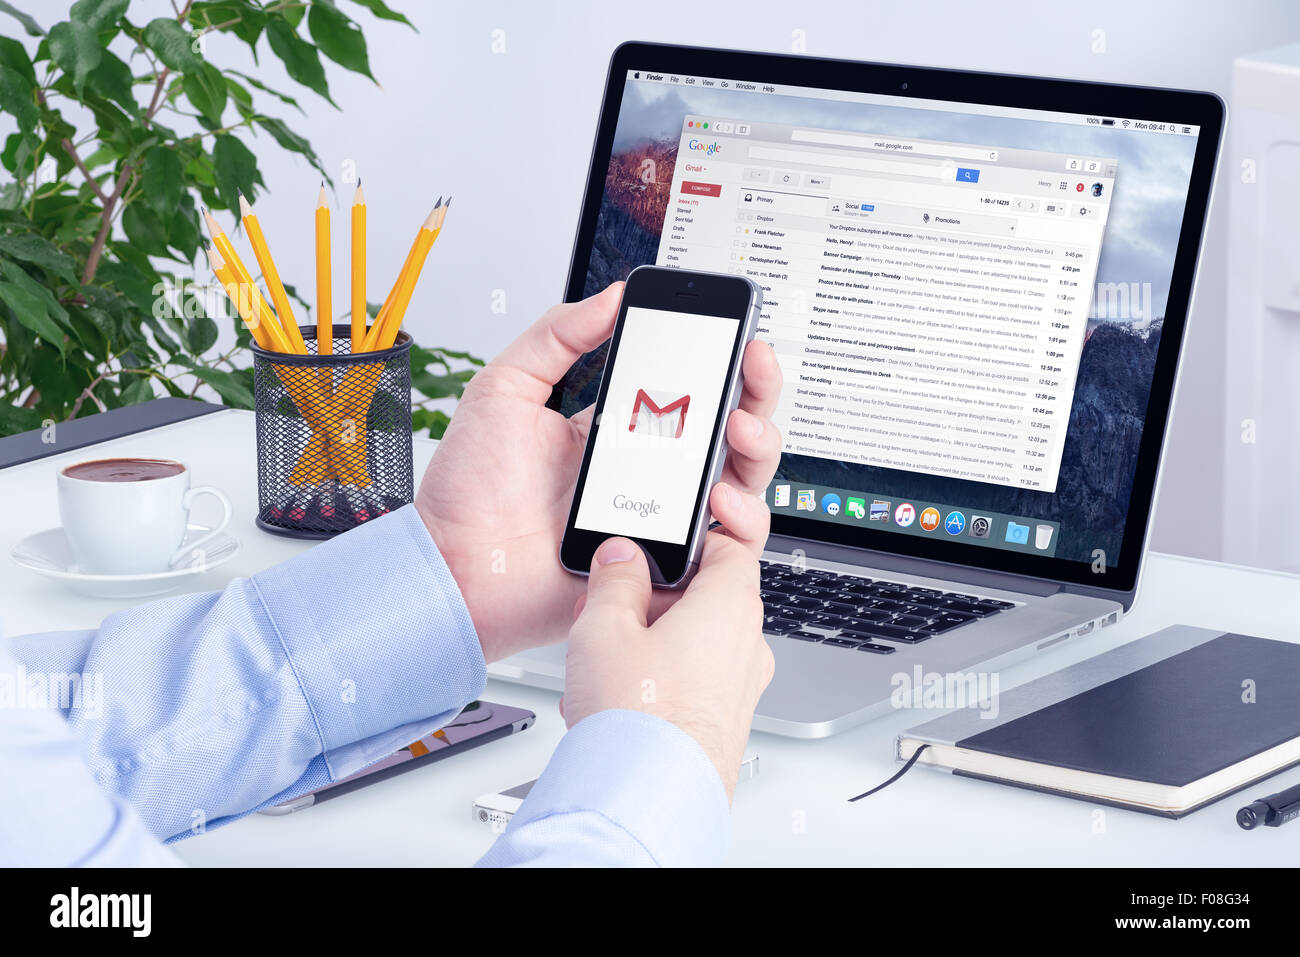 Varna, Bulgaria - May 29, 2015: Gmail app on the iPhone display in man hands and Gmail desktop version on the Macbook screen. Stock Photo